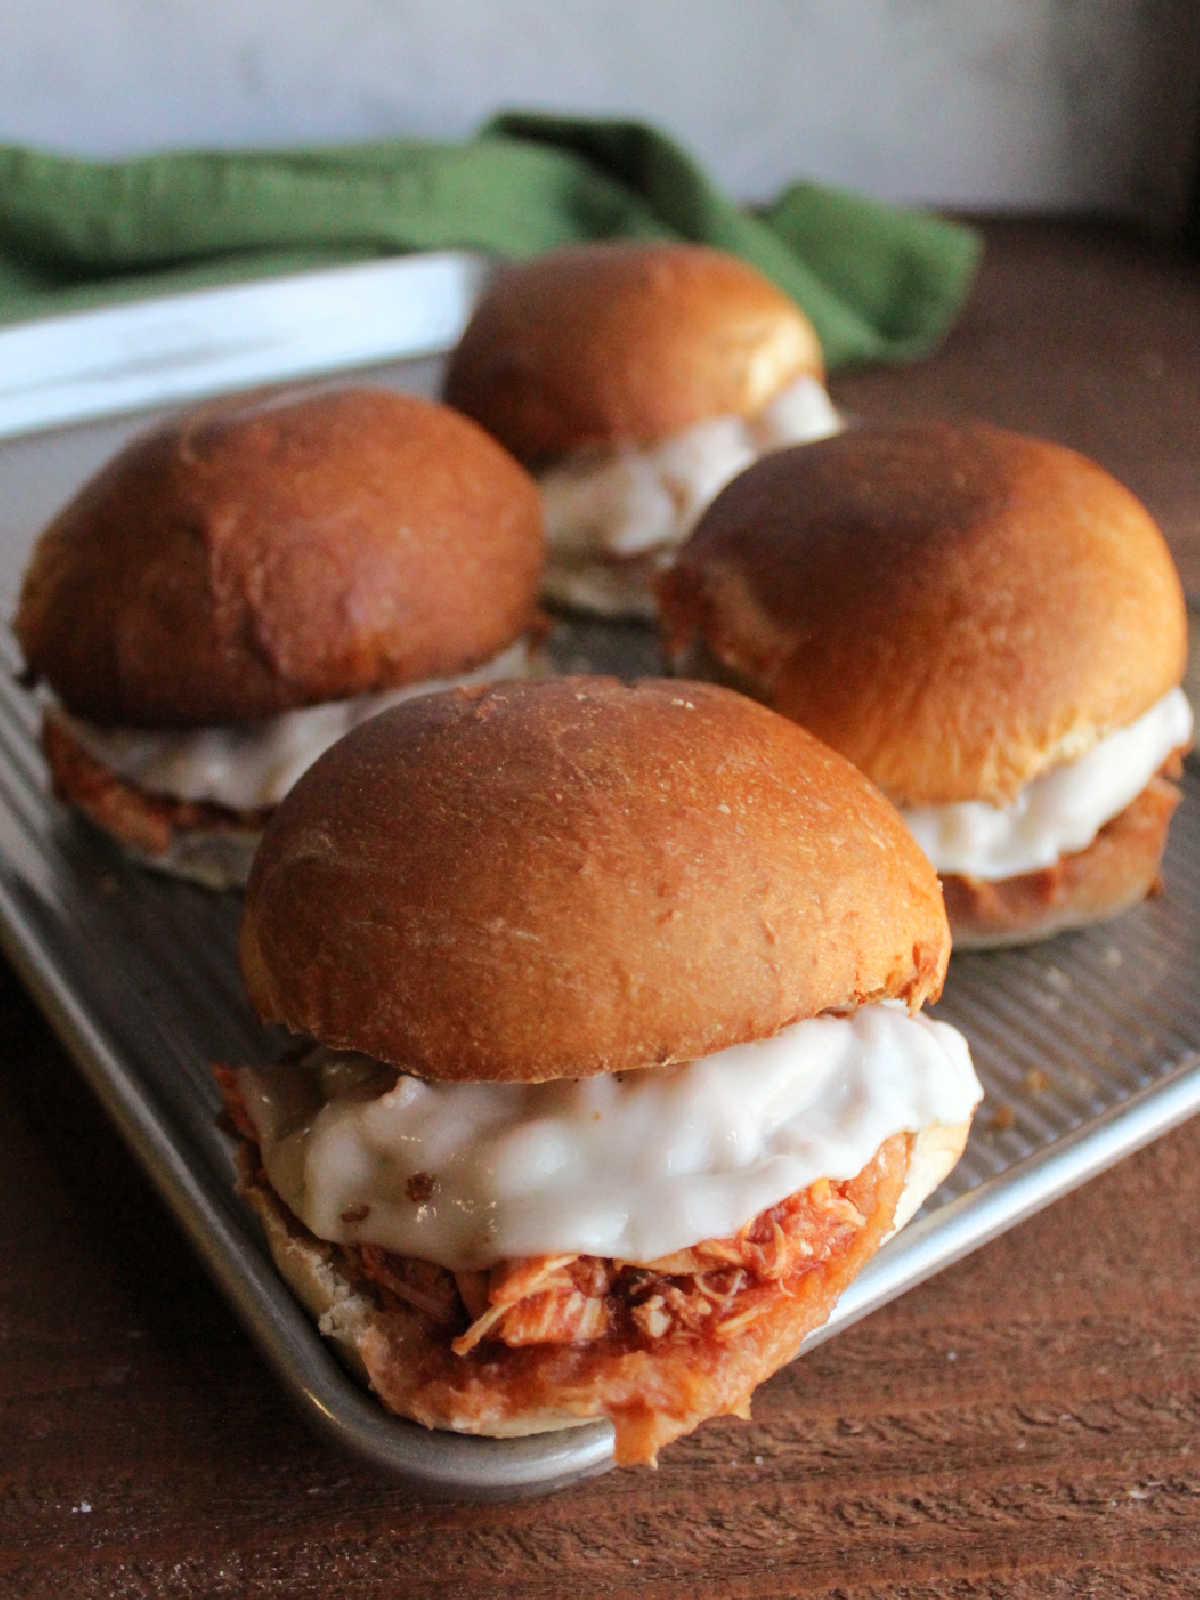 Shredded chicken parmesan sandwiches with melted cheese and toasted garlic bread buns. 